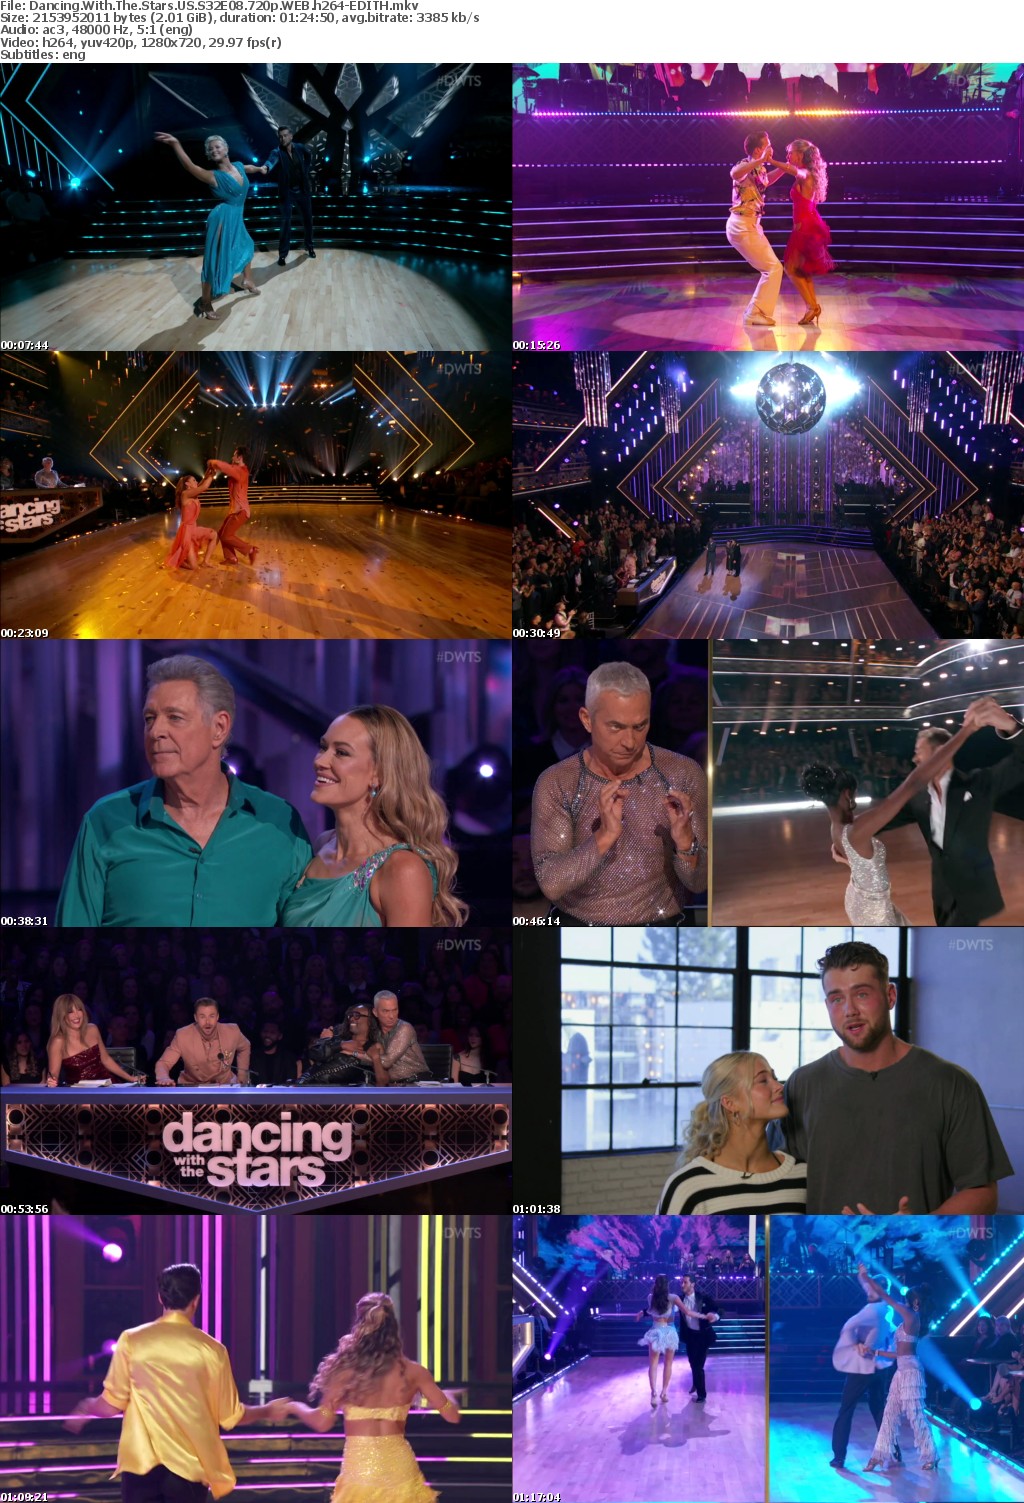 Dancing With The Stars US S32E08 720p WEB h264-EDITH